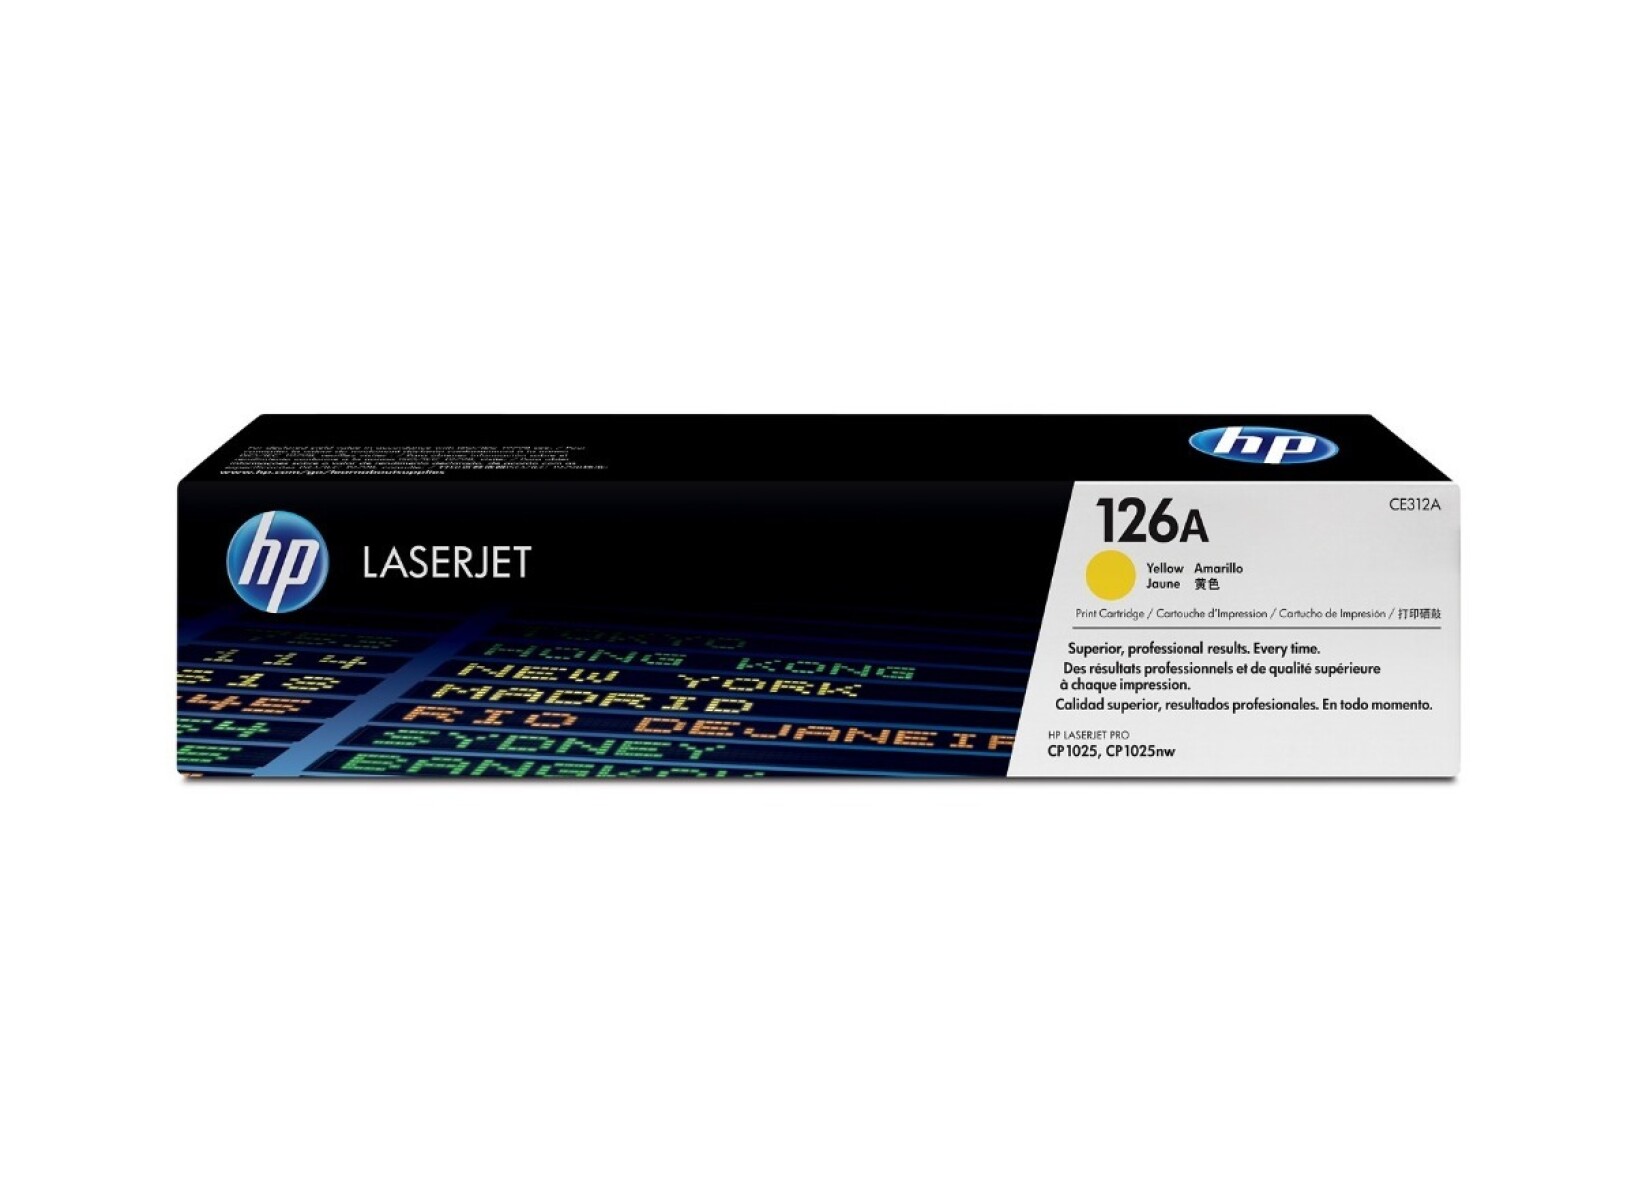 HP TONER CE312A AMARILLO 126A CP1000/1025NW/M175 1000CPS - 2479 